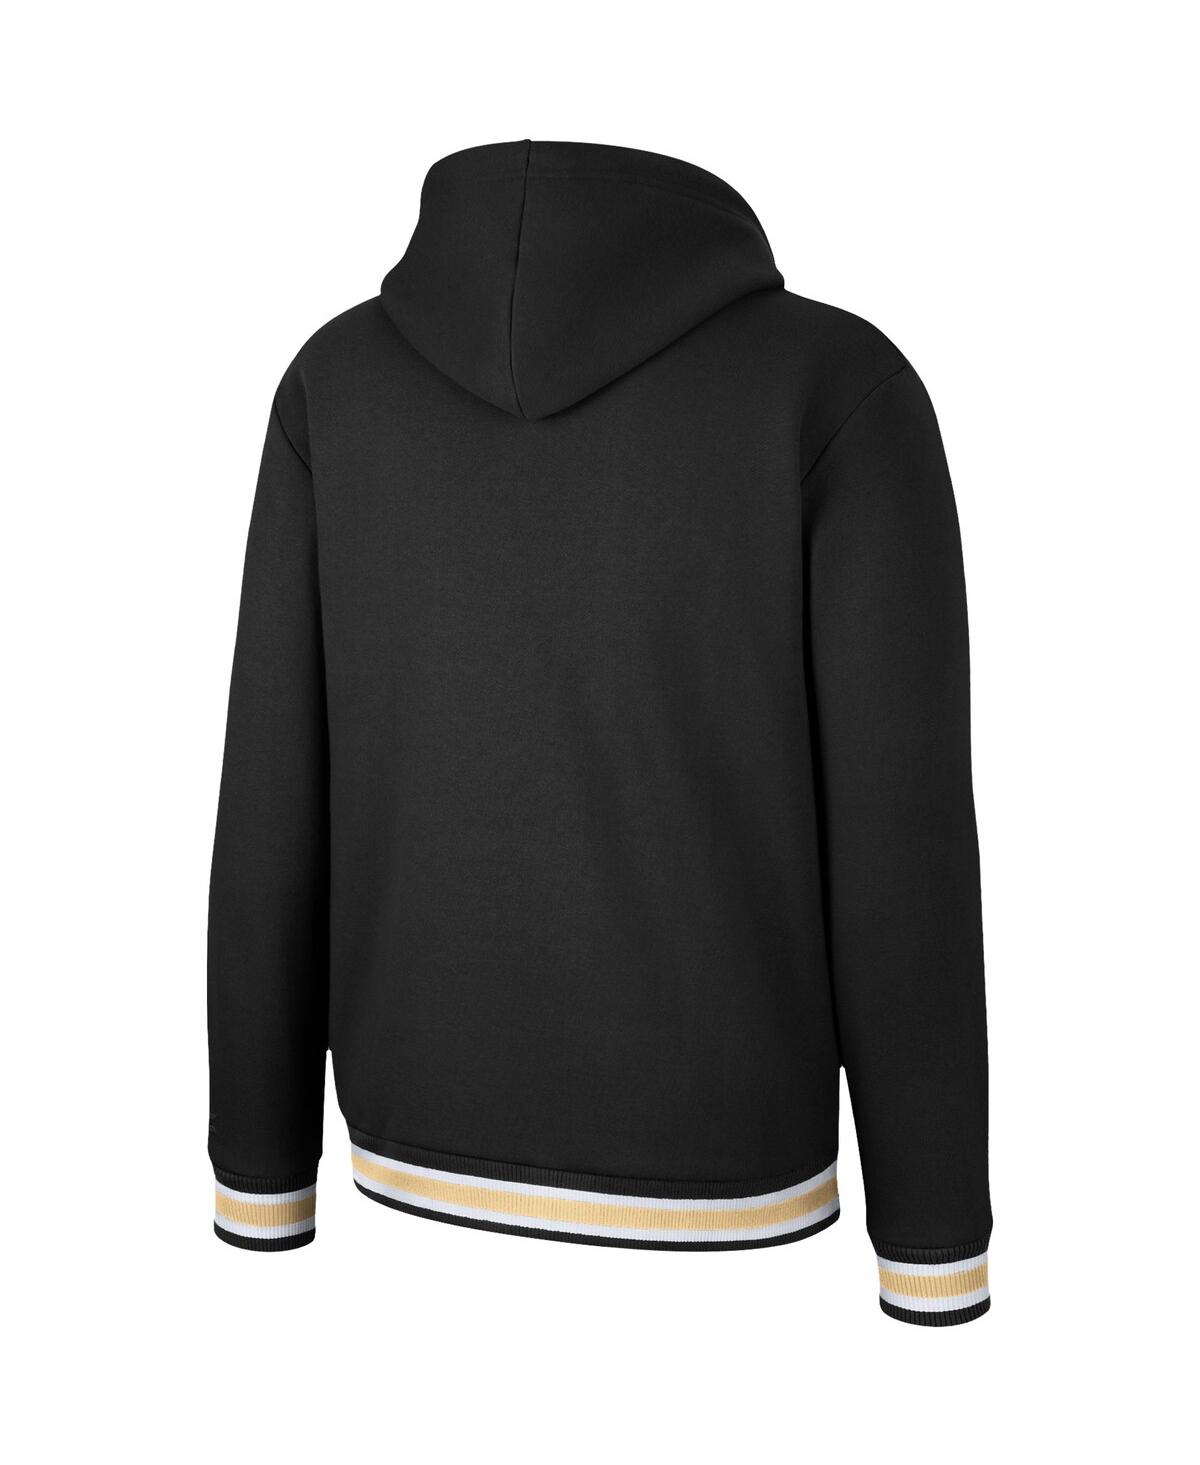 Shop Colosseum Men's  Black Army Black Knights Varsity Arch Pullover Hoodie